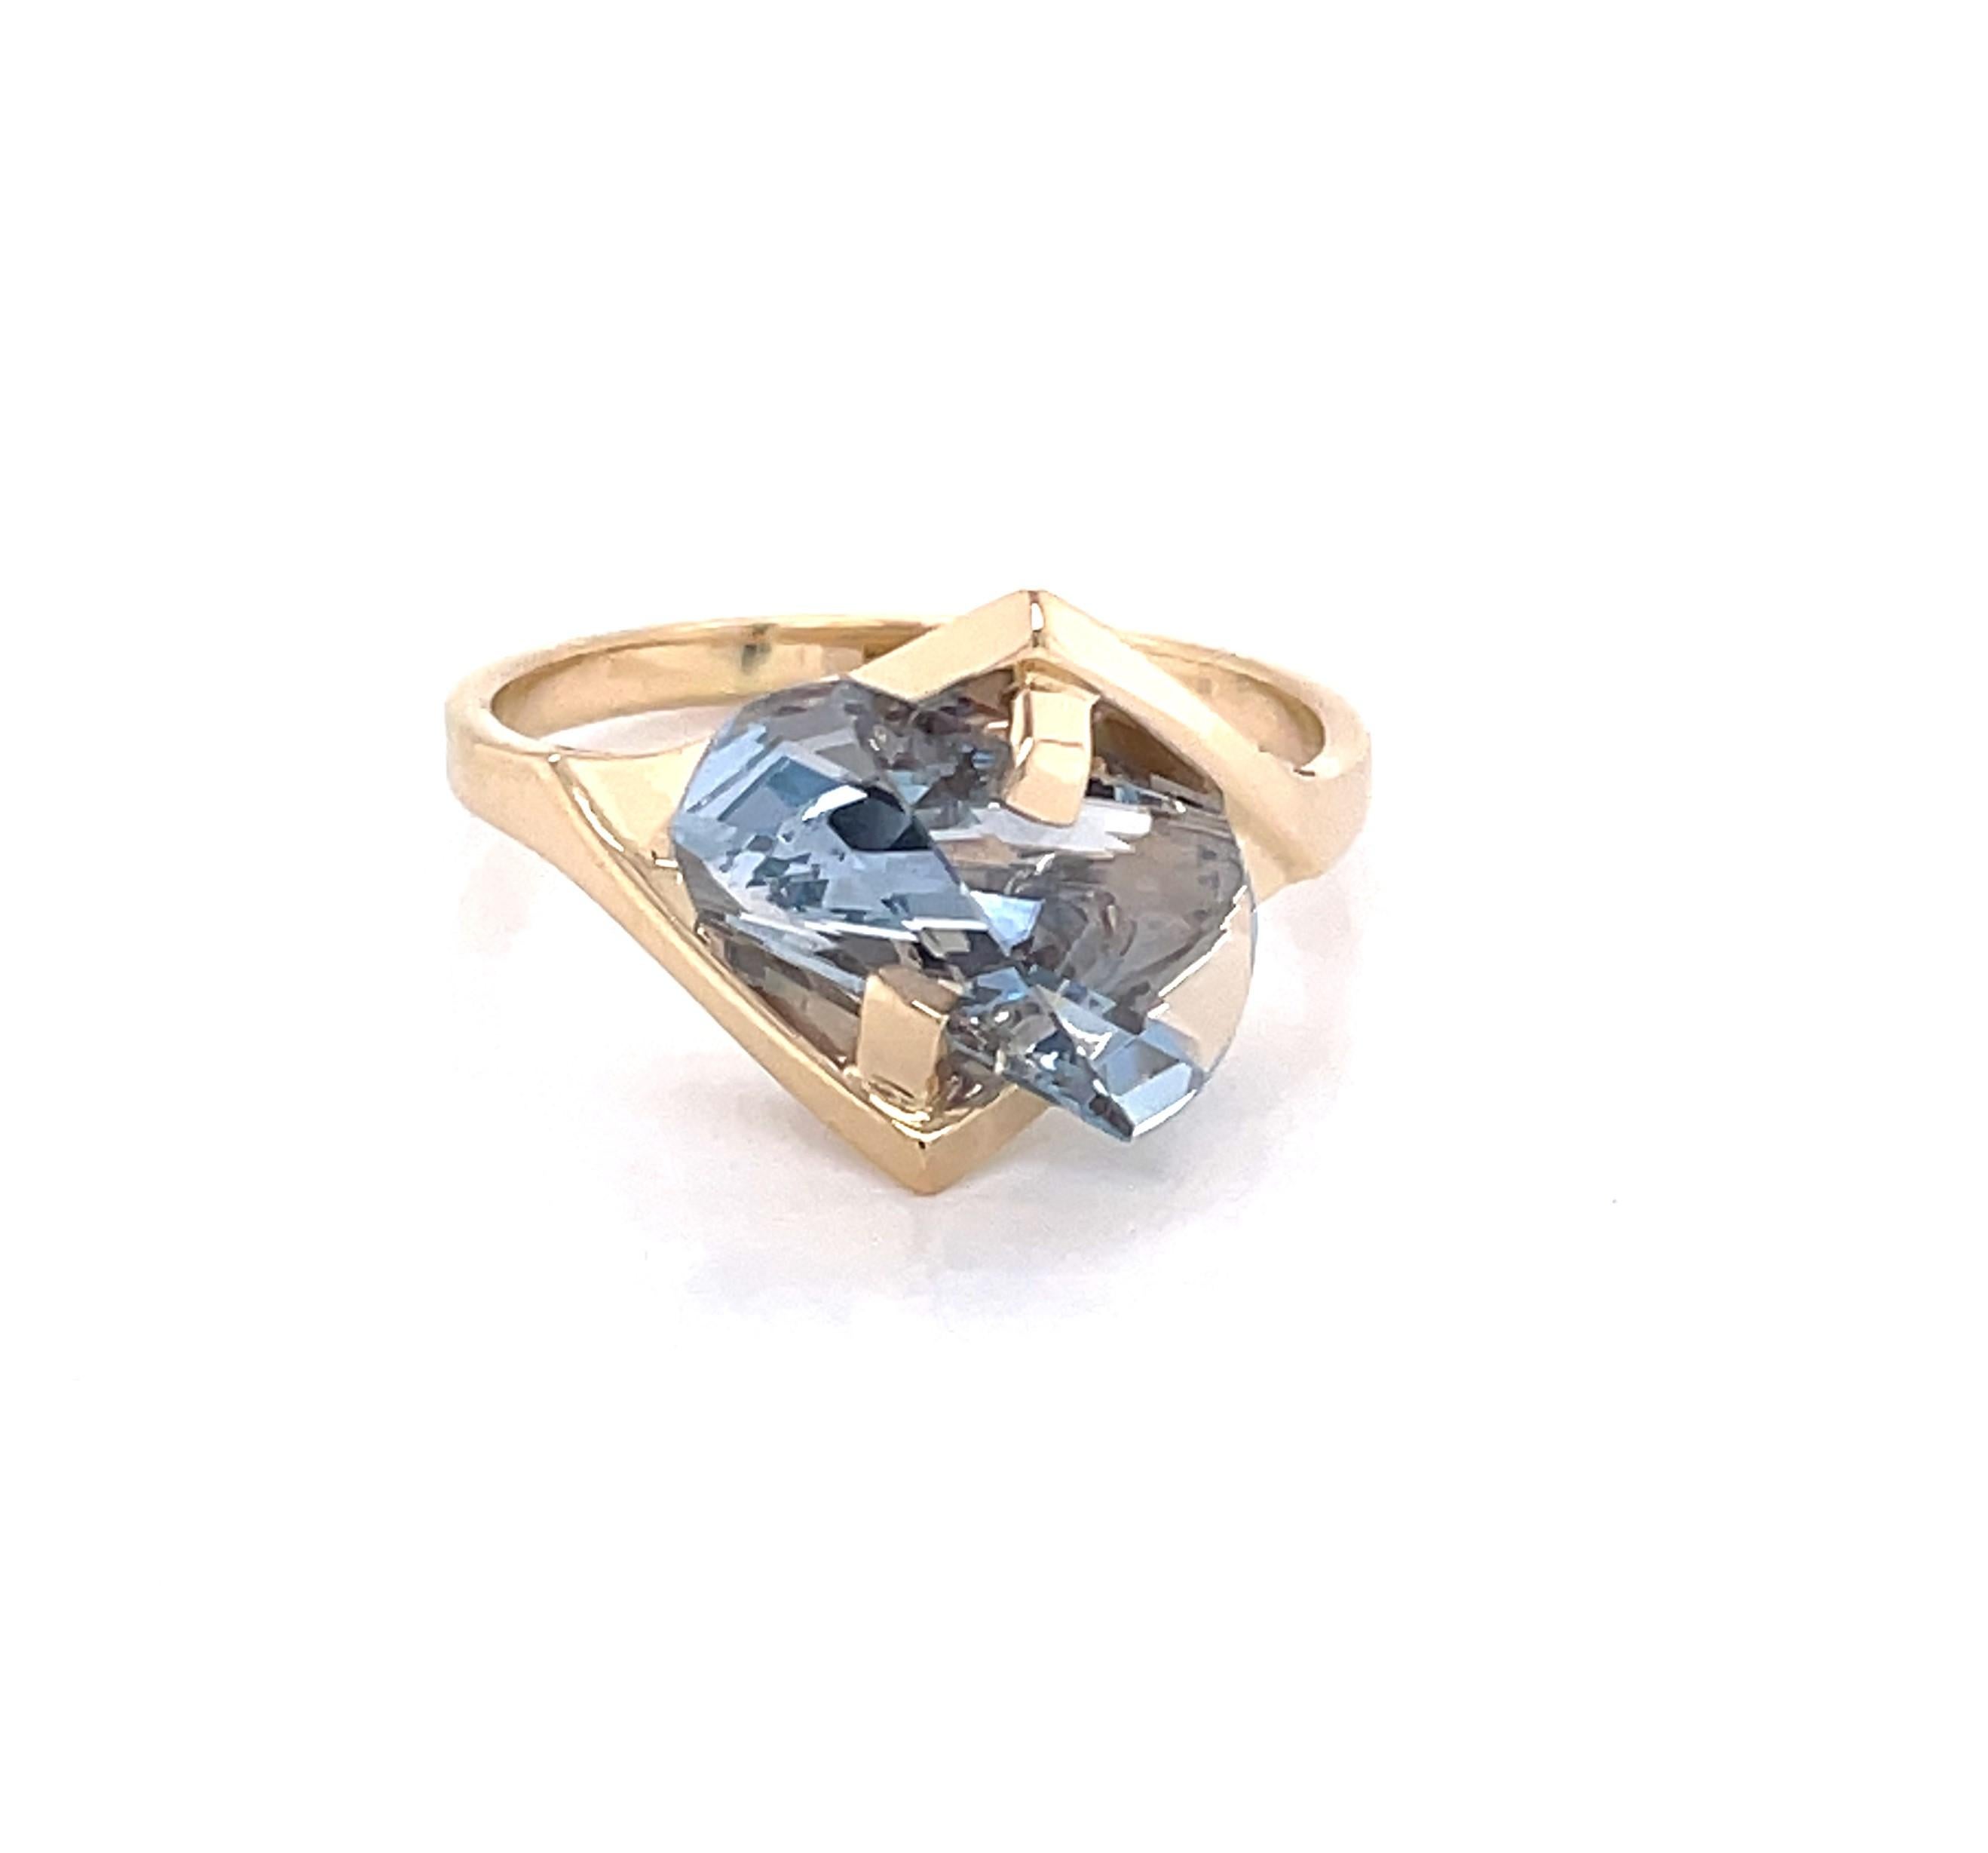 Appreciate this abstract shape stone and setting as a unique choice when looking for something special. The ice blue color and interesting fantasy cut of this topaz stone is stunning as it is suspended in the complementing fourteen karat 14K yellow